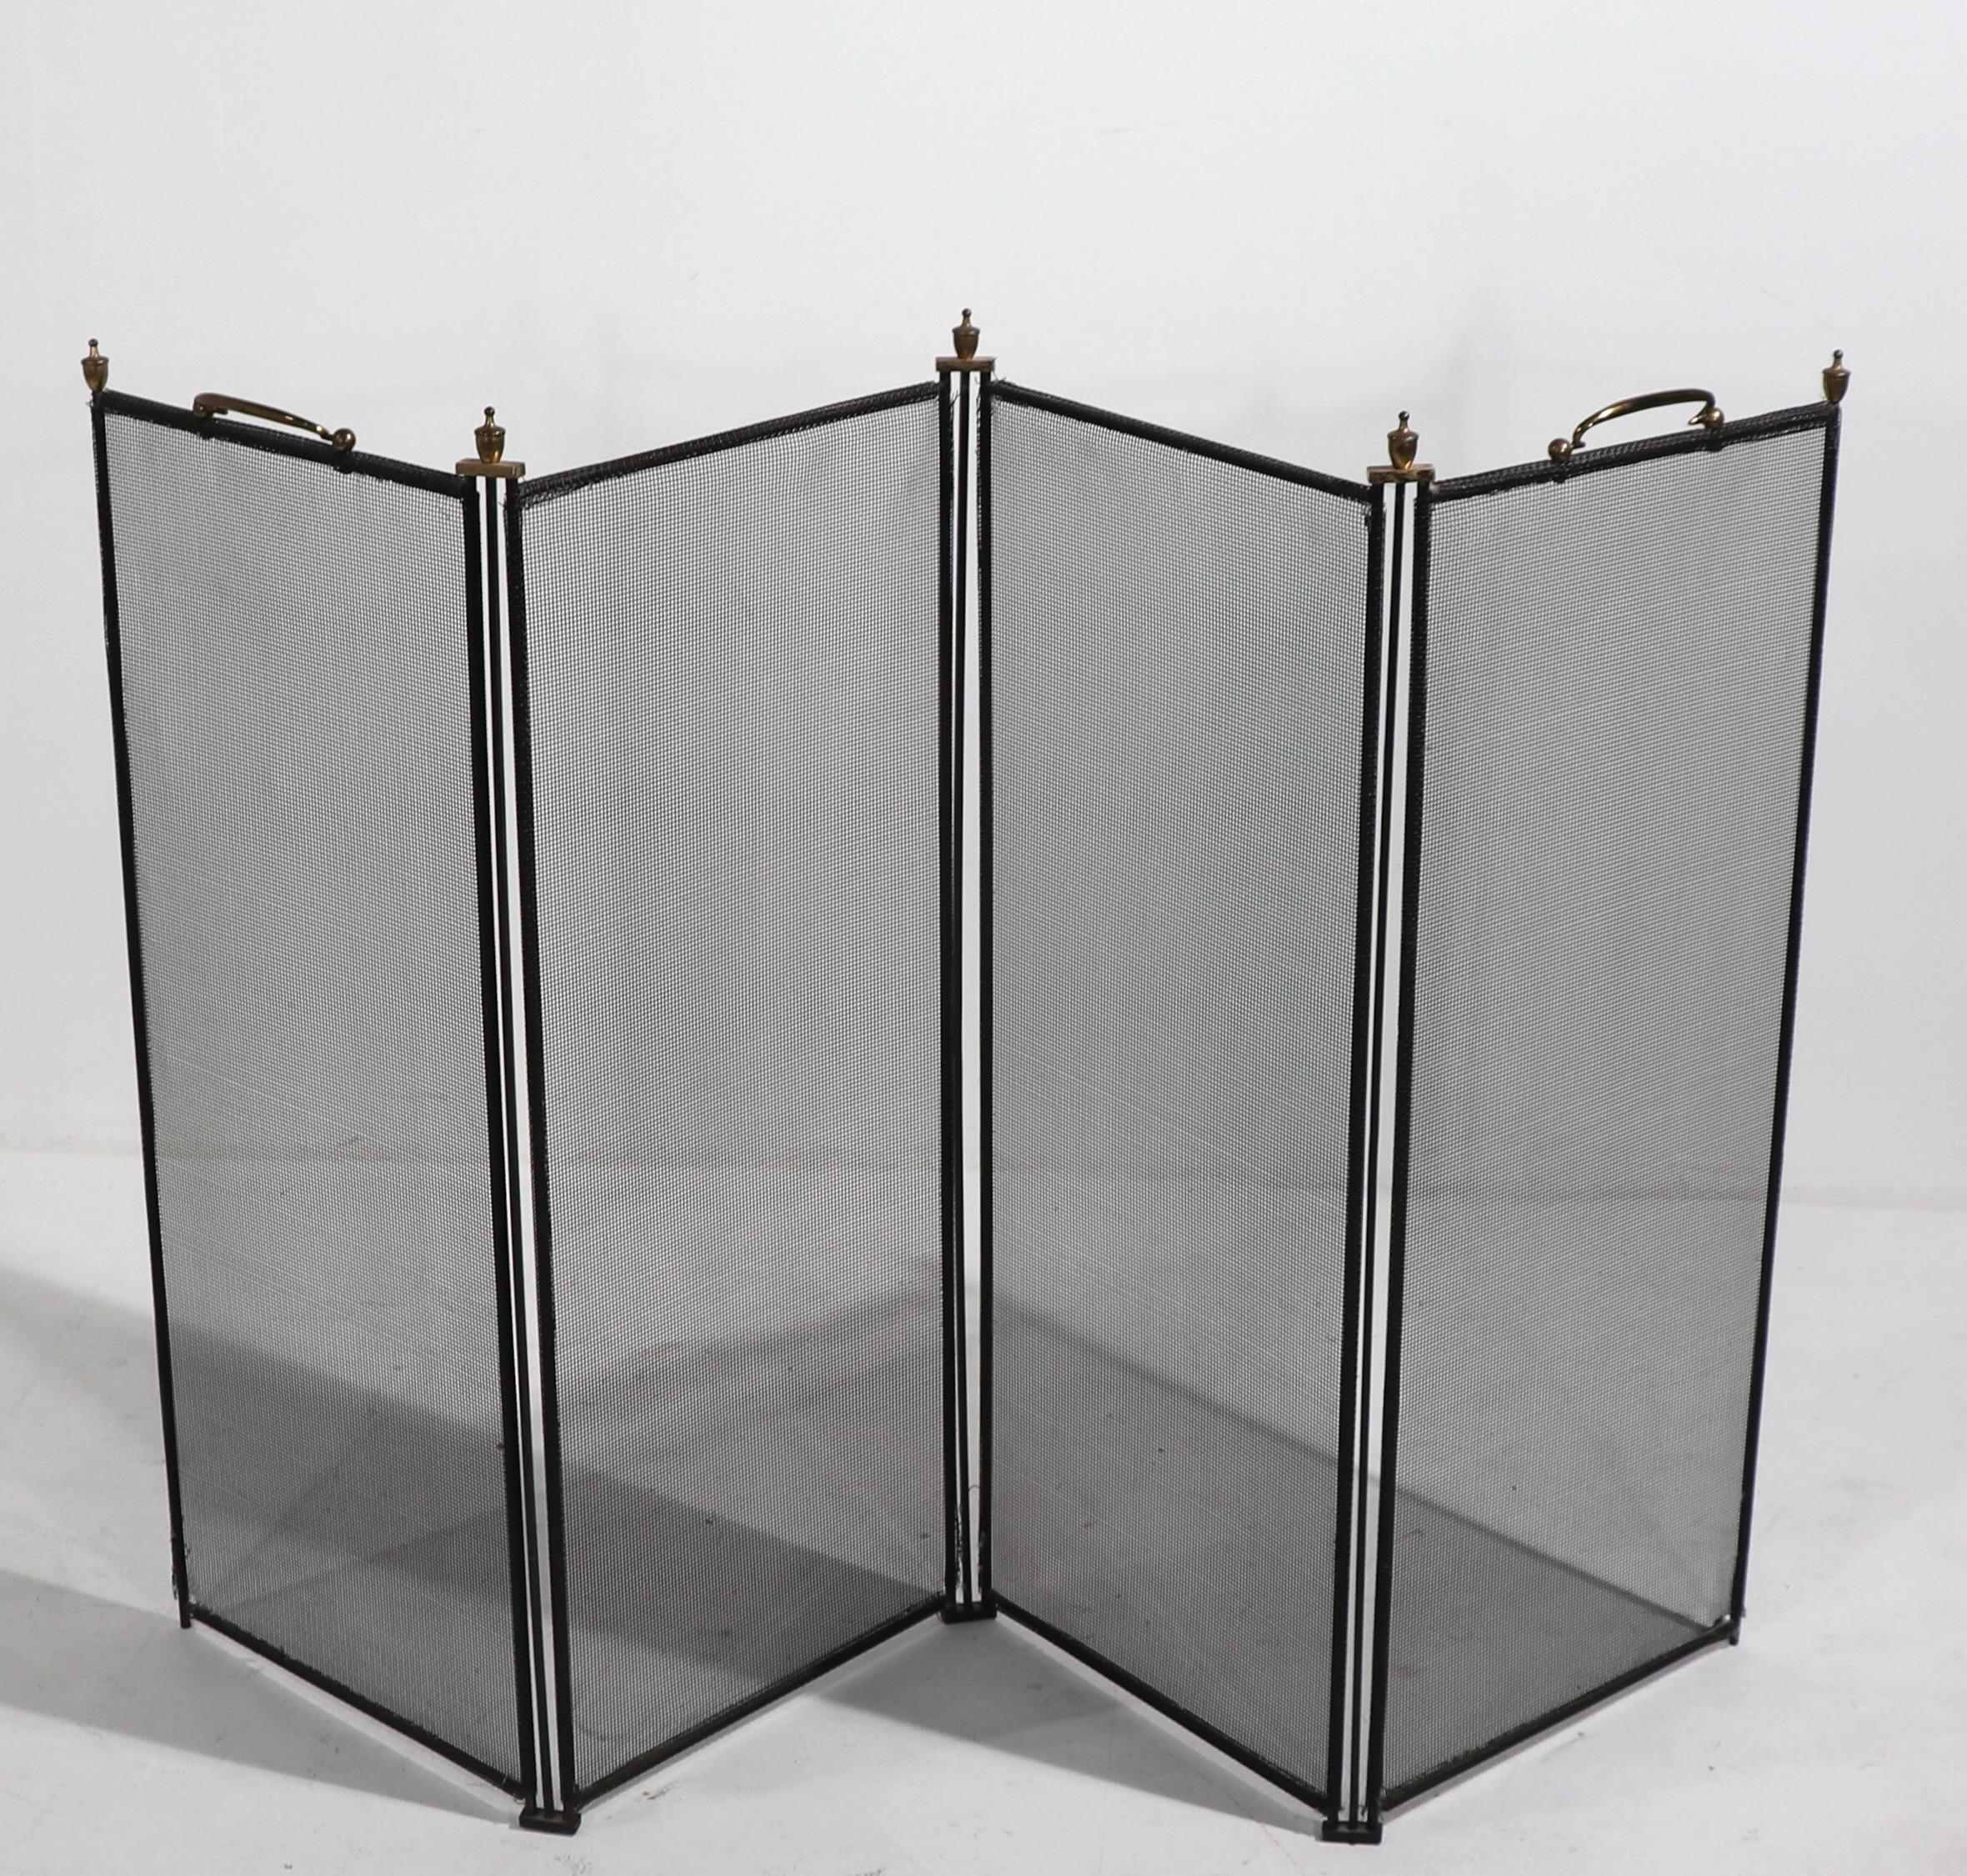 Nice tailored folding fireplace screen, having black screen and frame, with brass handles, and urn form finials. This example is in very good, original condition, showing only inconsequential fraying at the corners, please see images. 
Each panel